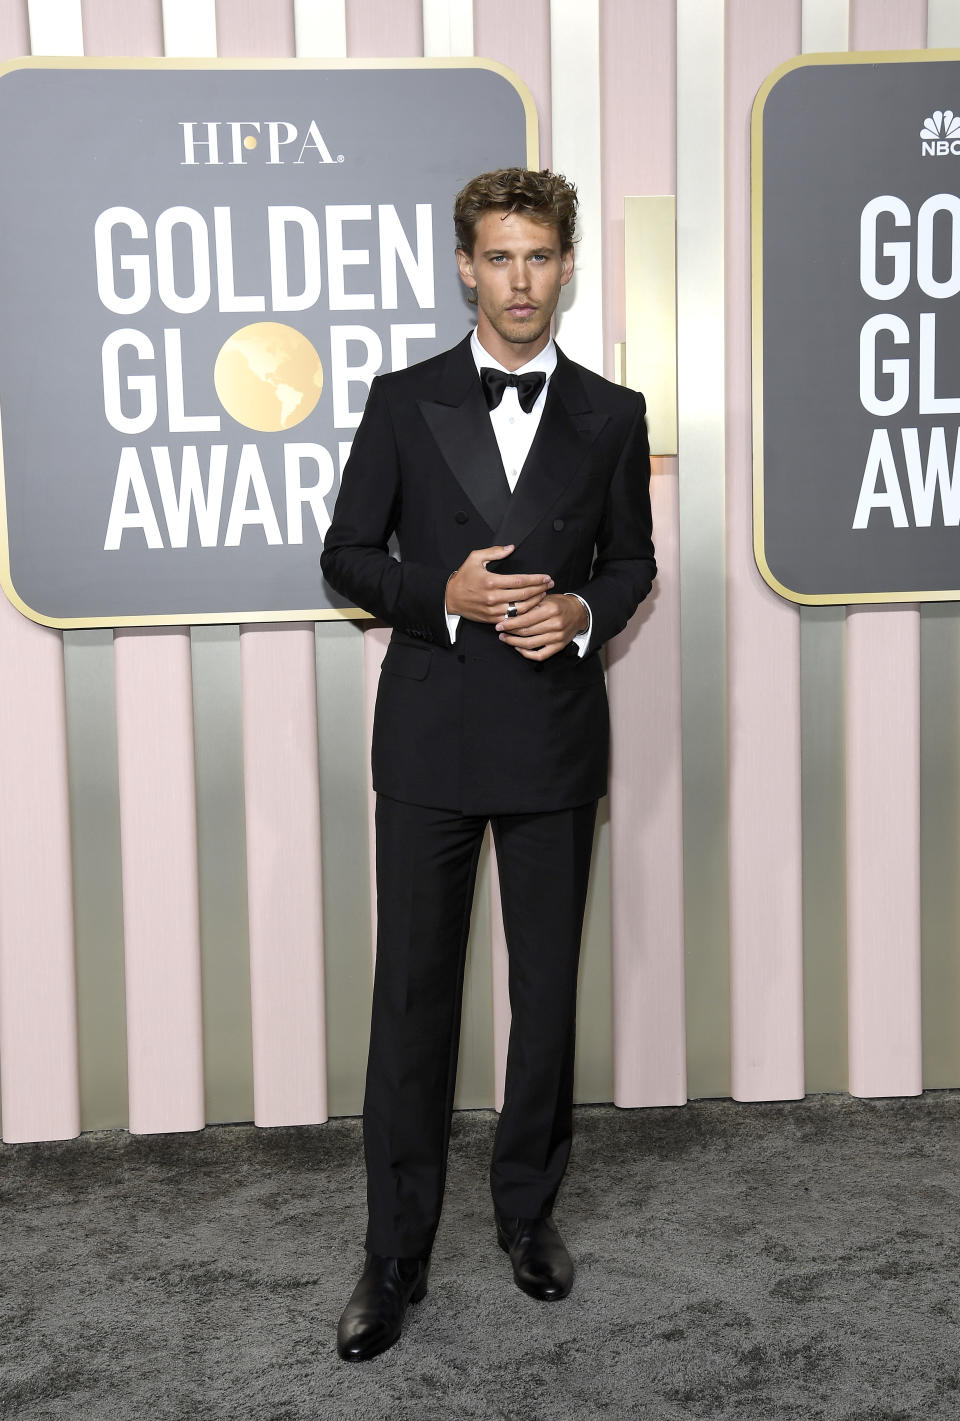 BEVERLY HILLS, CALIFORNIA - JANUARY 10: 80th Annual GOLDEN GLOBE AWARDS -- Pictured: Austin Butler arrives to the 80th Annual Golden Globe Awards held at the Beverly Hilton Hotel on January 10, 2023 in Beverly Hills, California. --  (Photo by Kevork Djansezian/NBC via Getty Images)